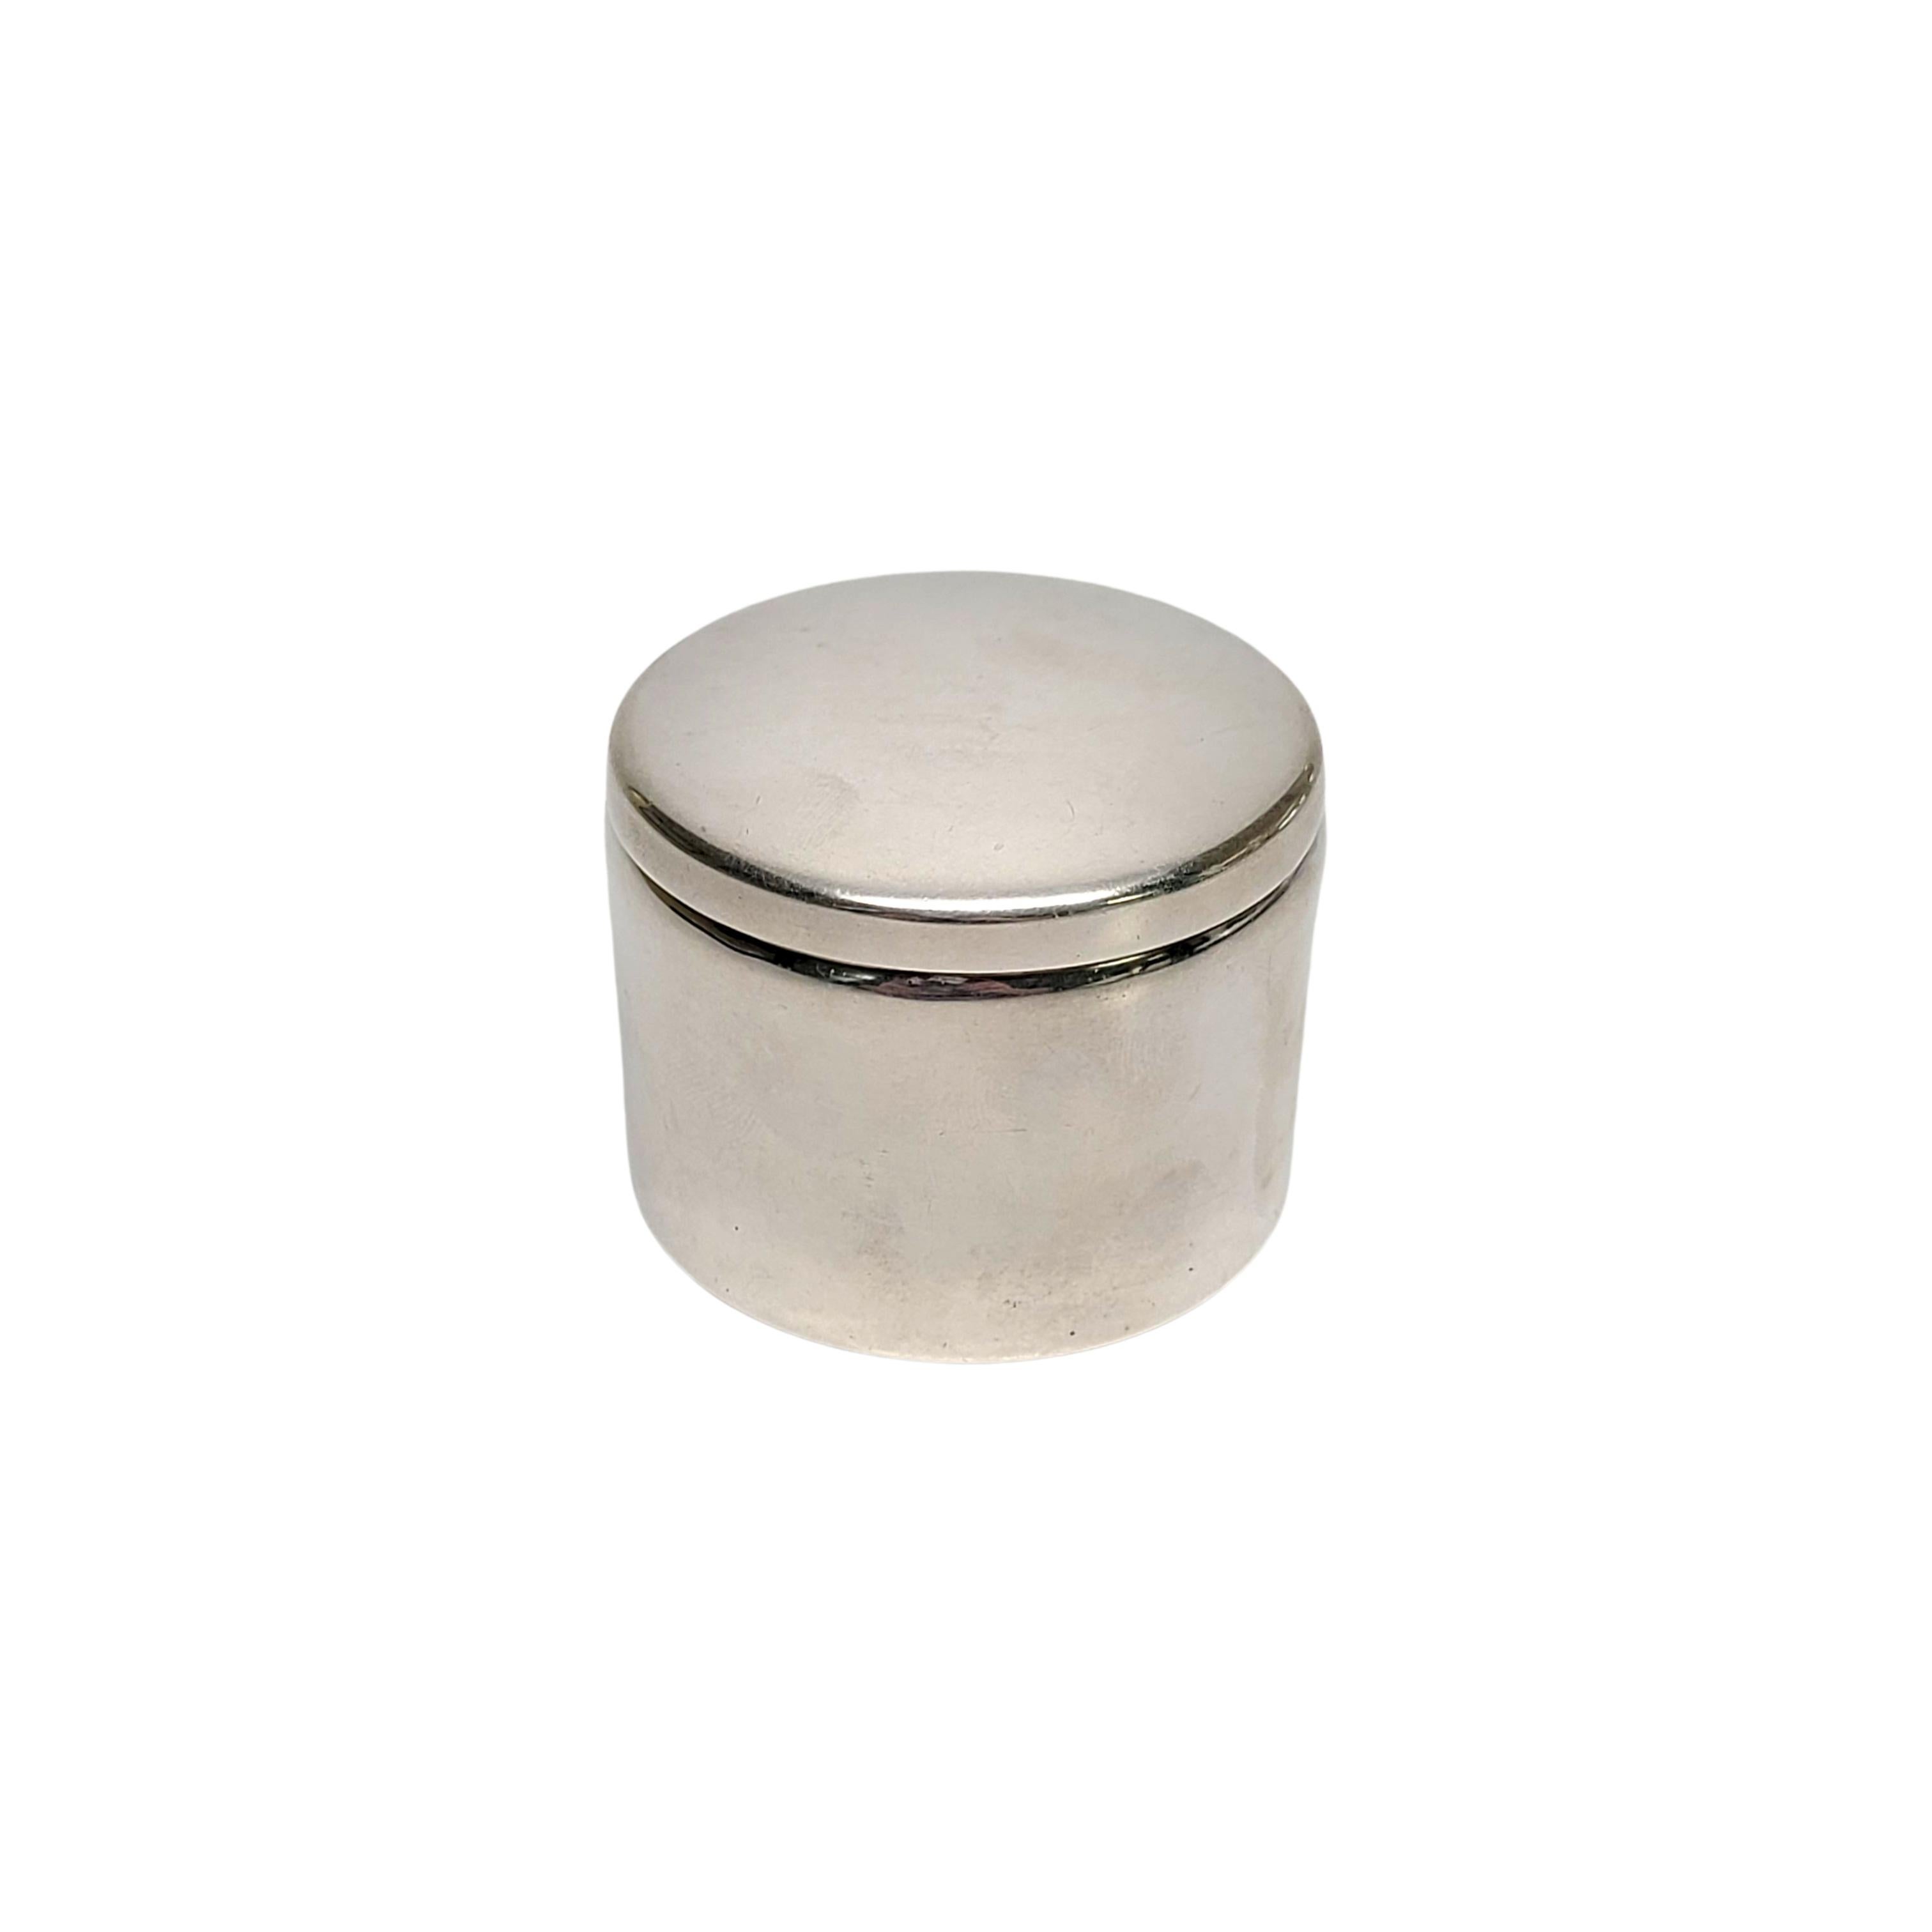 Sterling silver round box for dispensing postage stamps by Boardman.

No monogram

A small round box with a lid, stamps can be dispensed from a roll thru the vertical slot in the side of the box.

Measures 2